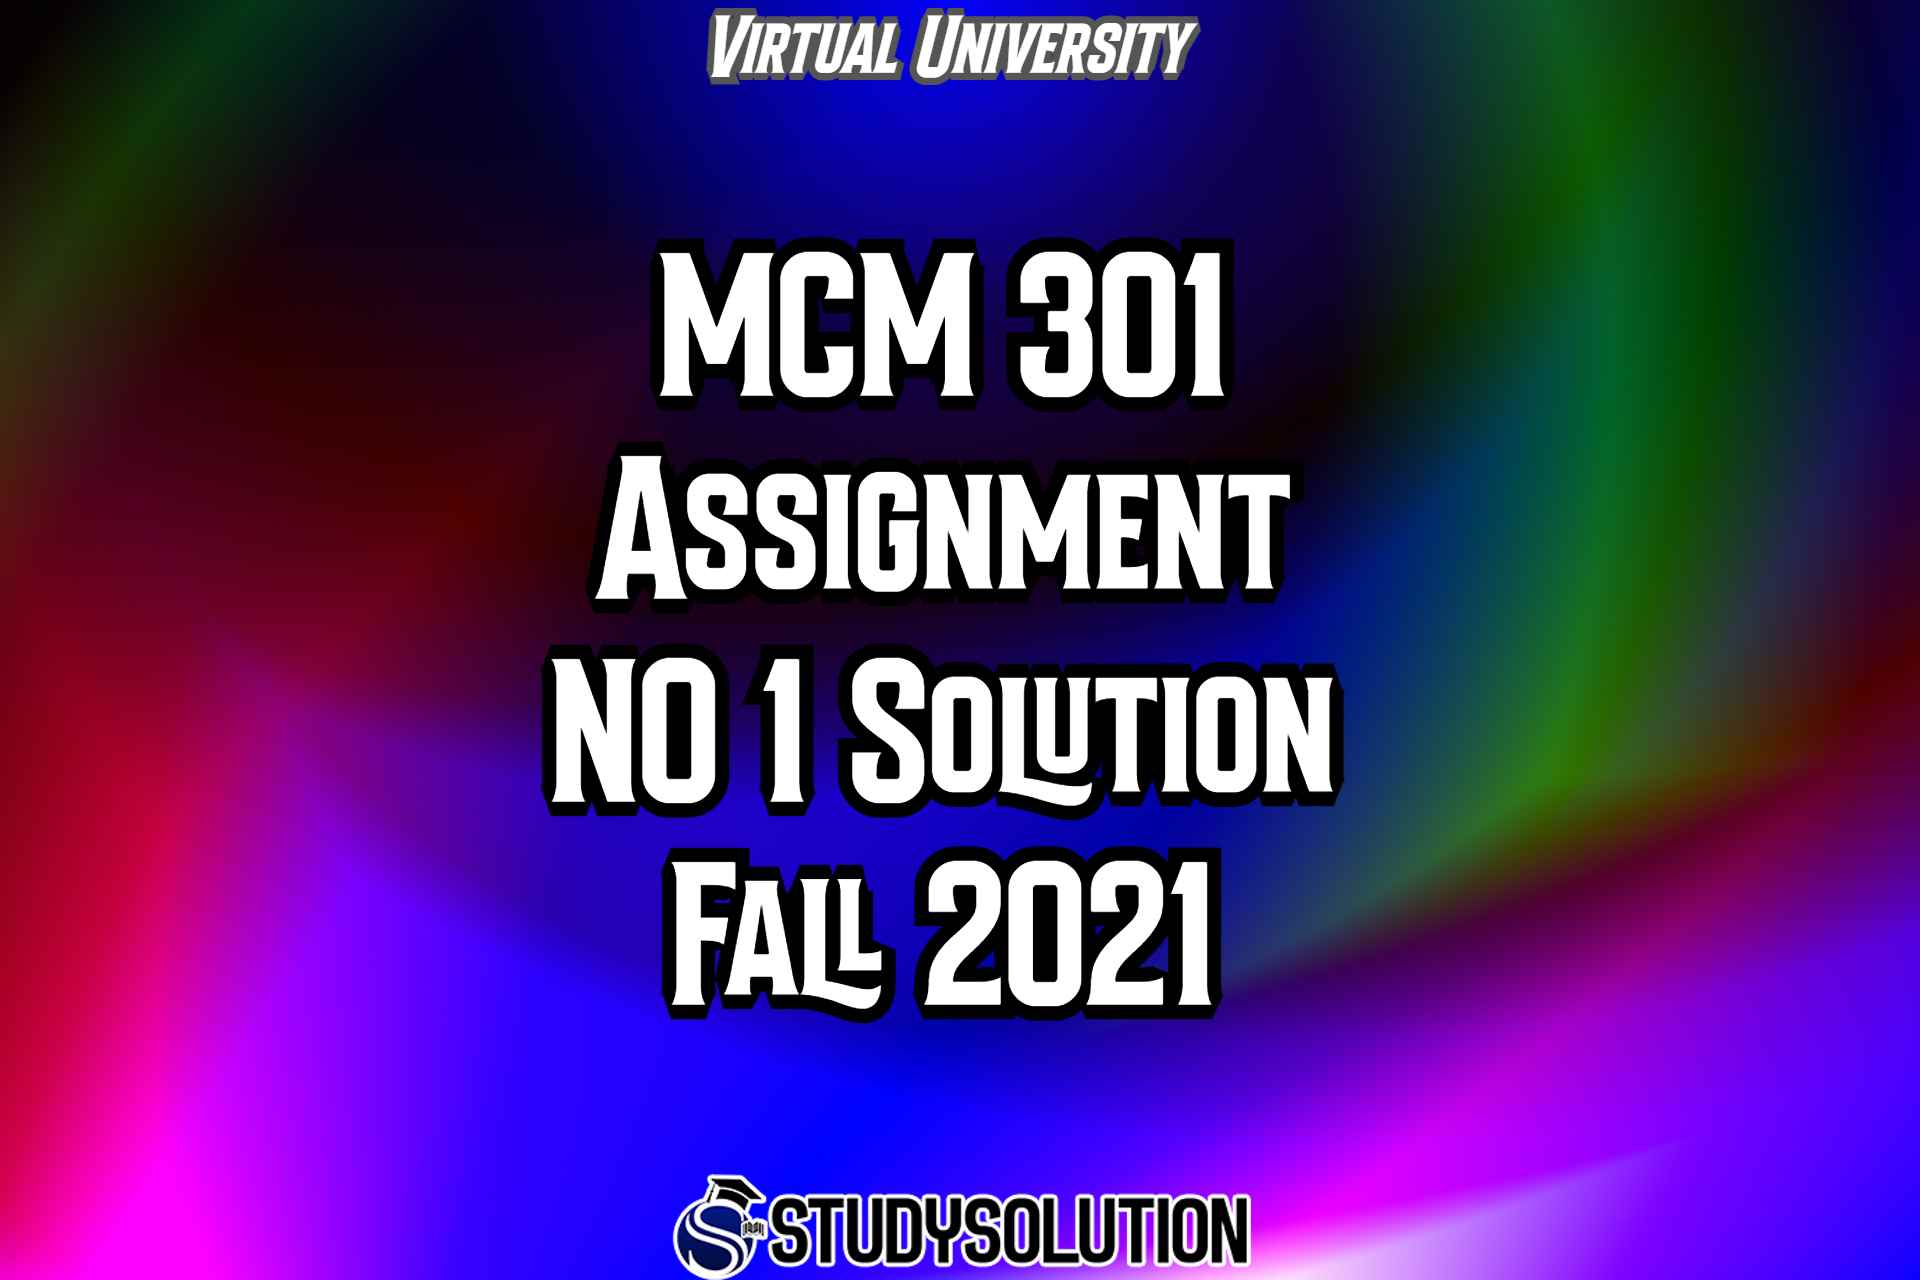 MCM301 Assignment NO 1 Solution Fall 2021